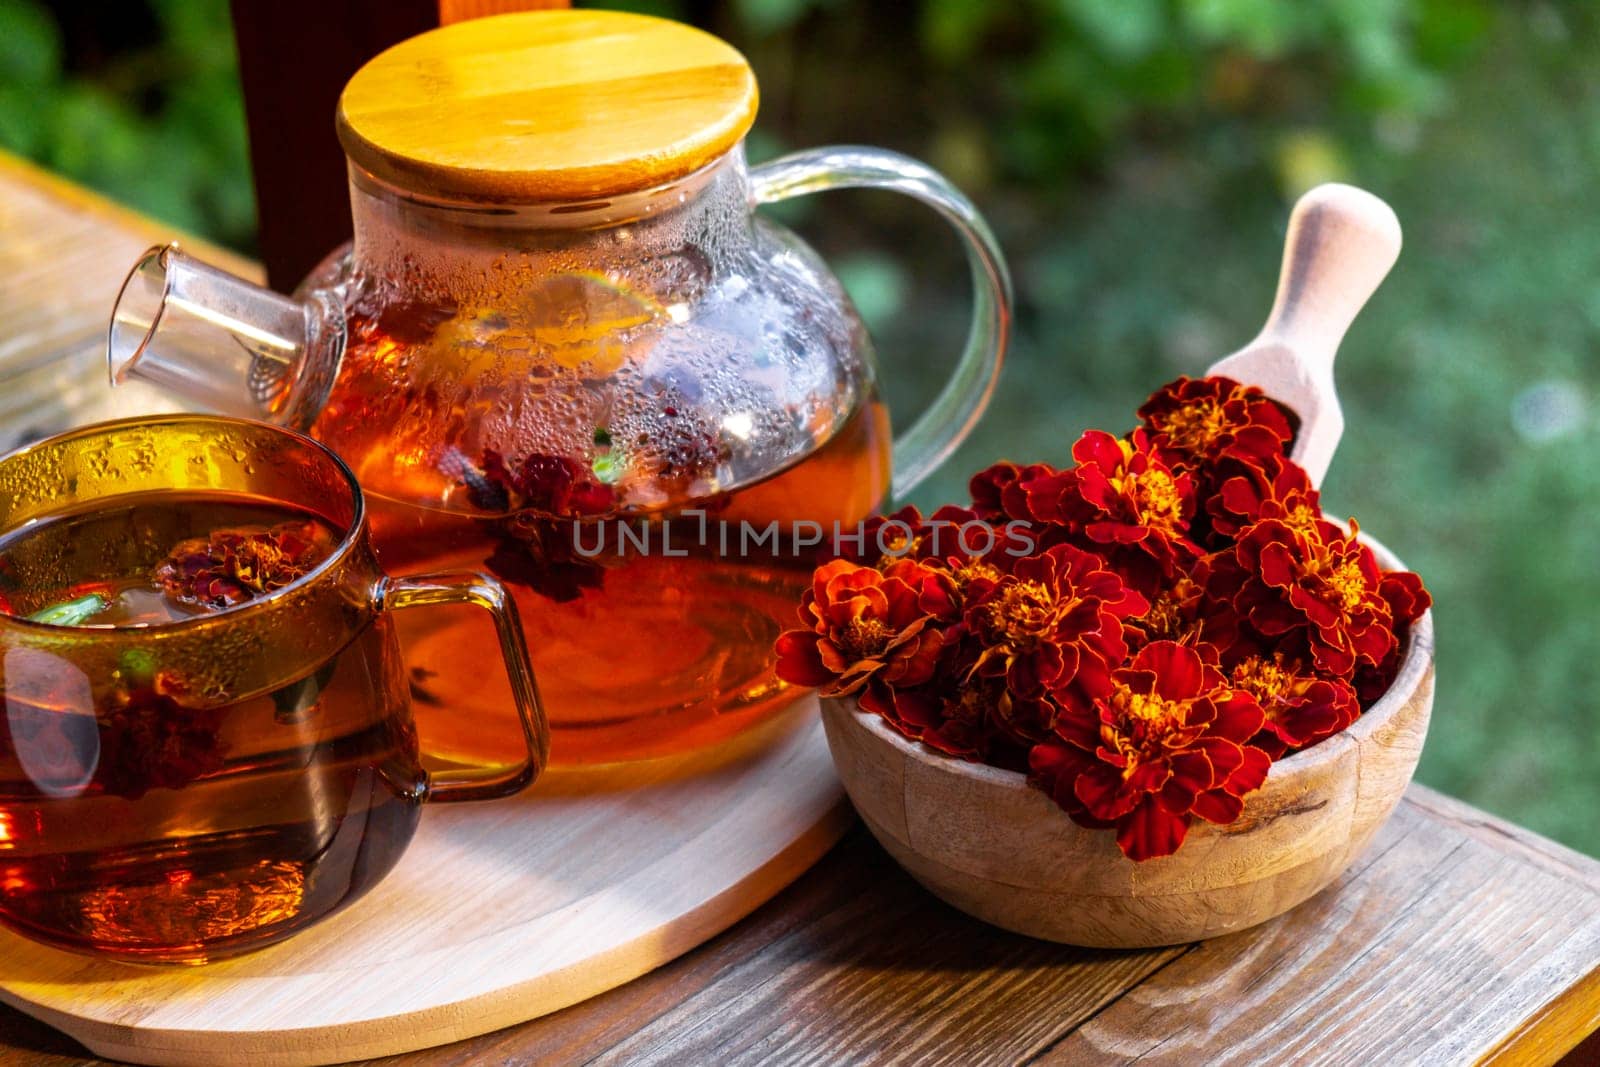 Marigold tea still life on table in green garden background. Healthy hot drink benefits. Natural organic aromatic drink in cup. Home-grown immunity-boosting herbs for tea. Autumn winter warming drink by anna_stasiia